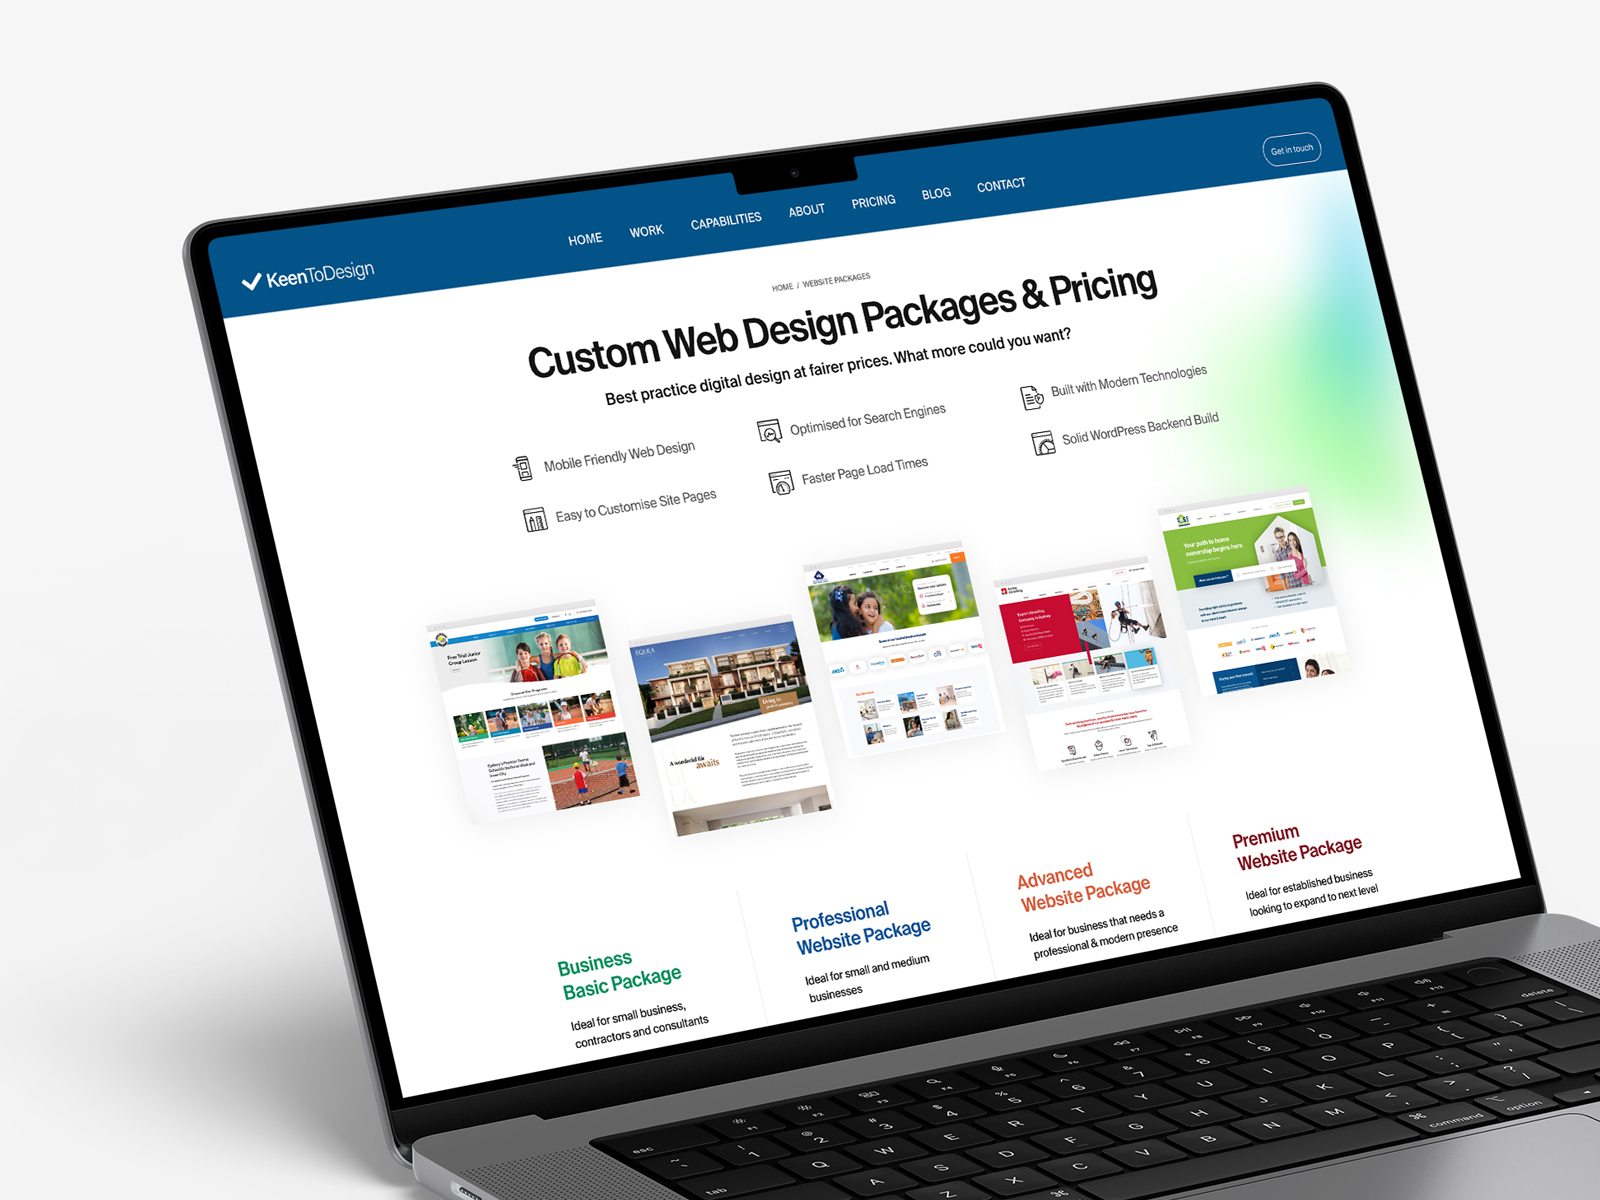 Packages and Pricing Page